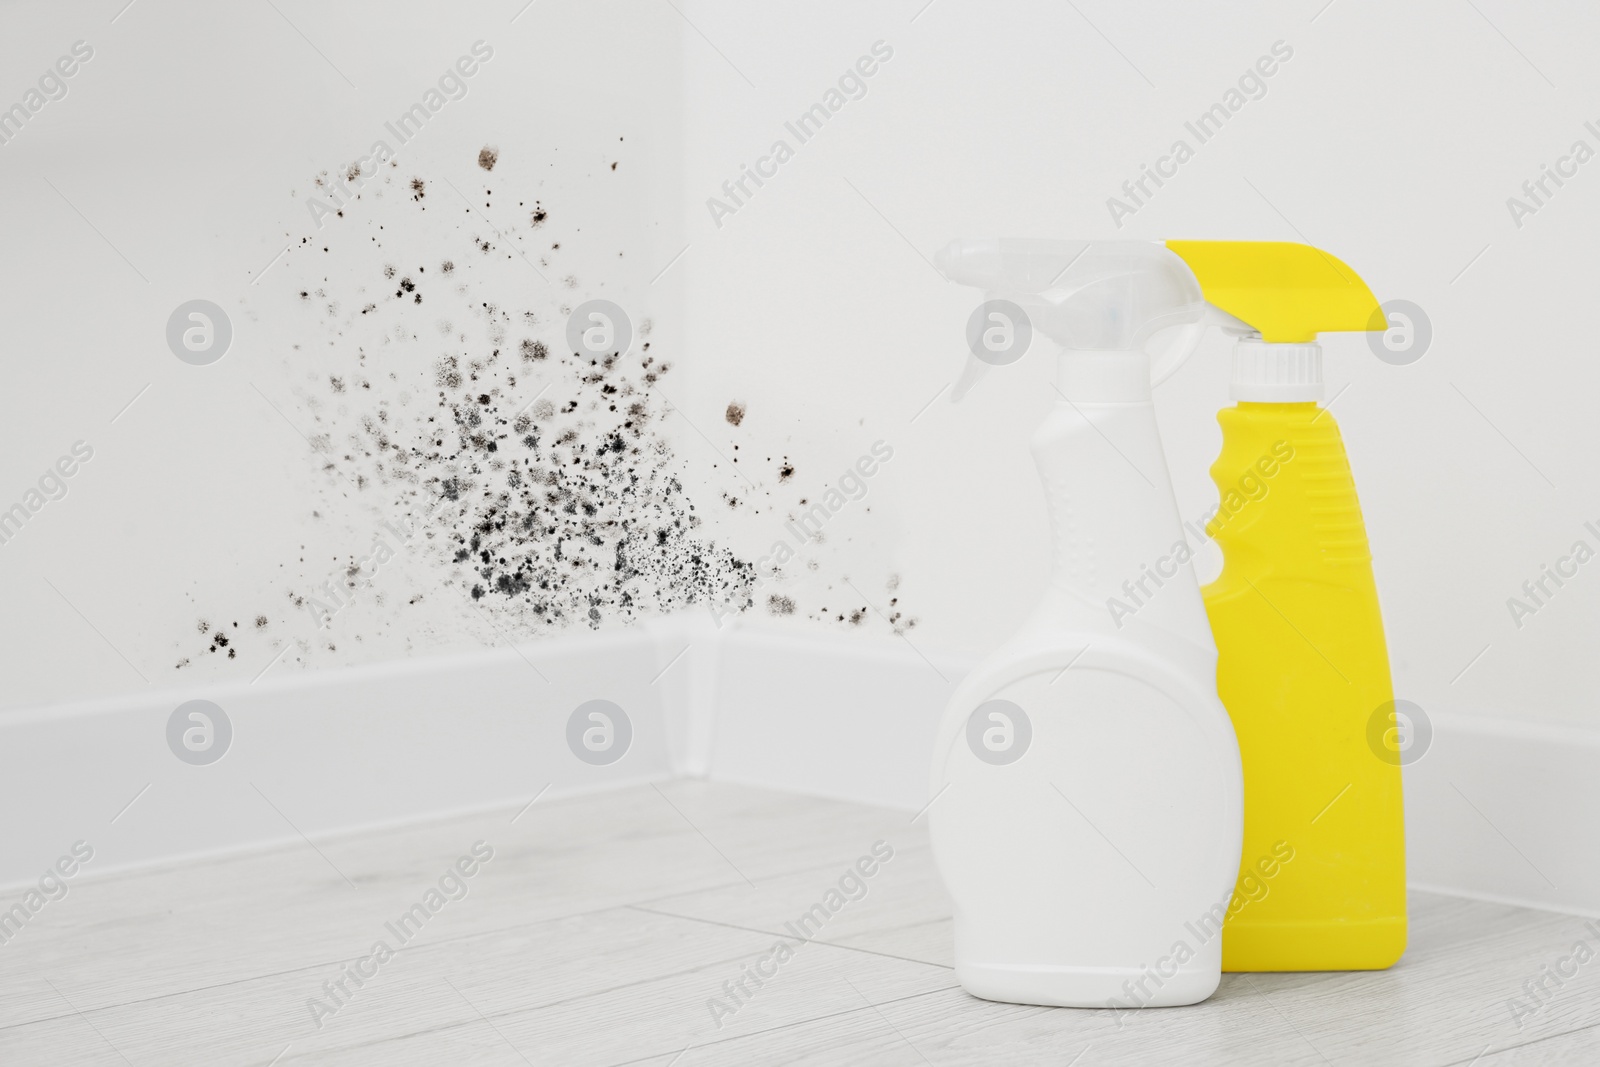 Image of Mold remover spray bottles on floor near affected walls in room